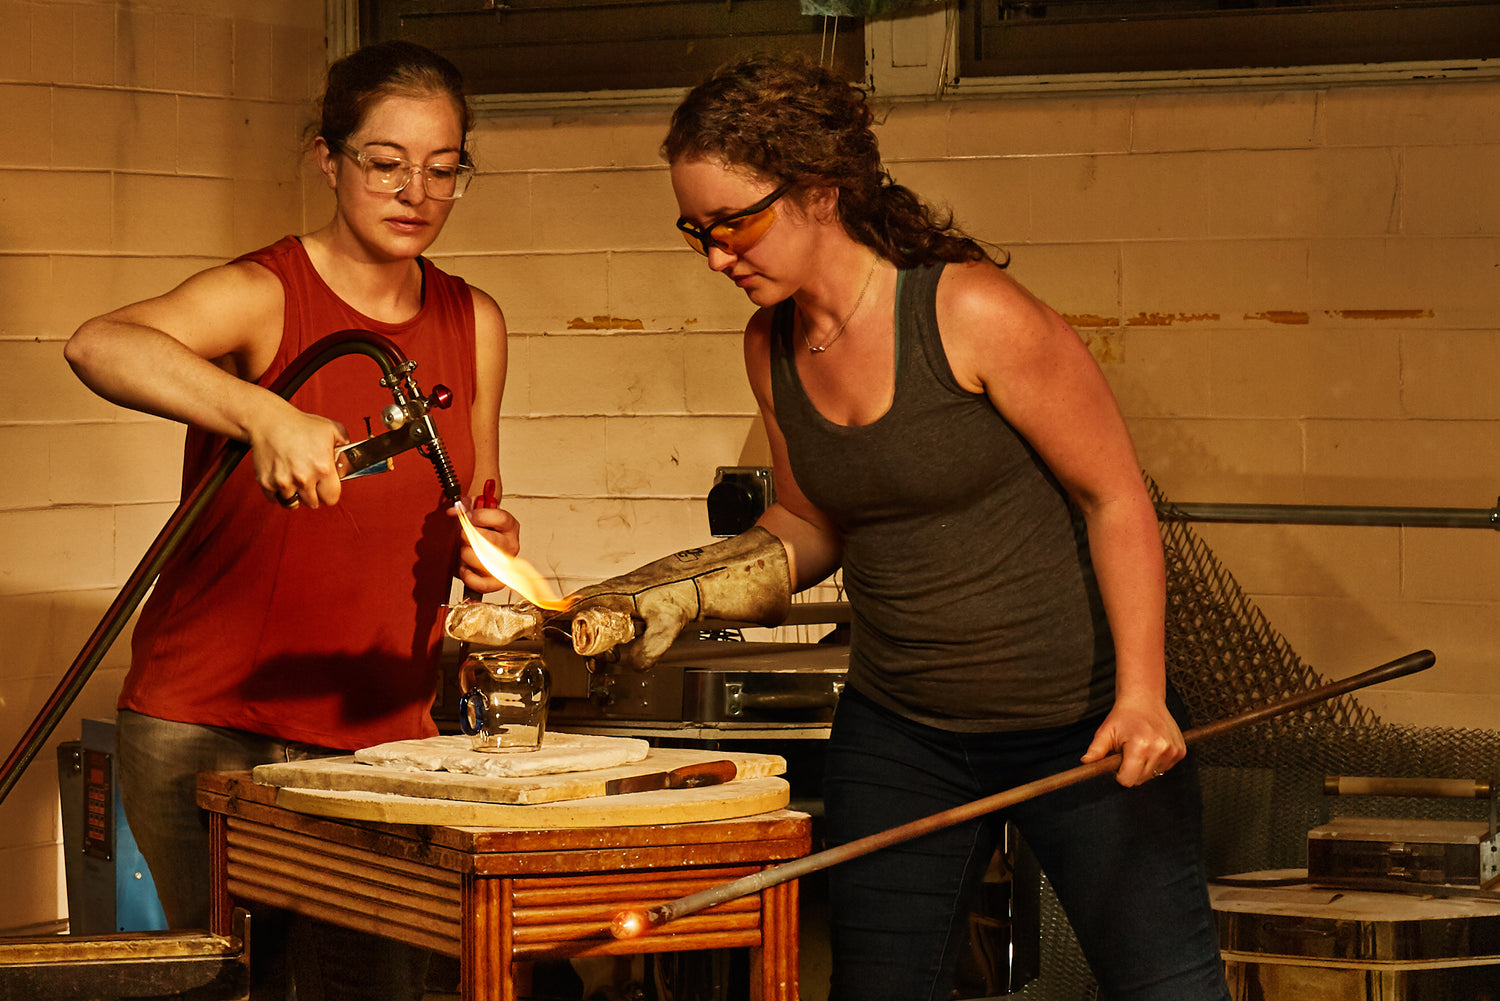 A woman with red shirt using a towch to heat up glass and a woman in grey shirt holding the glass